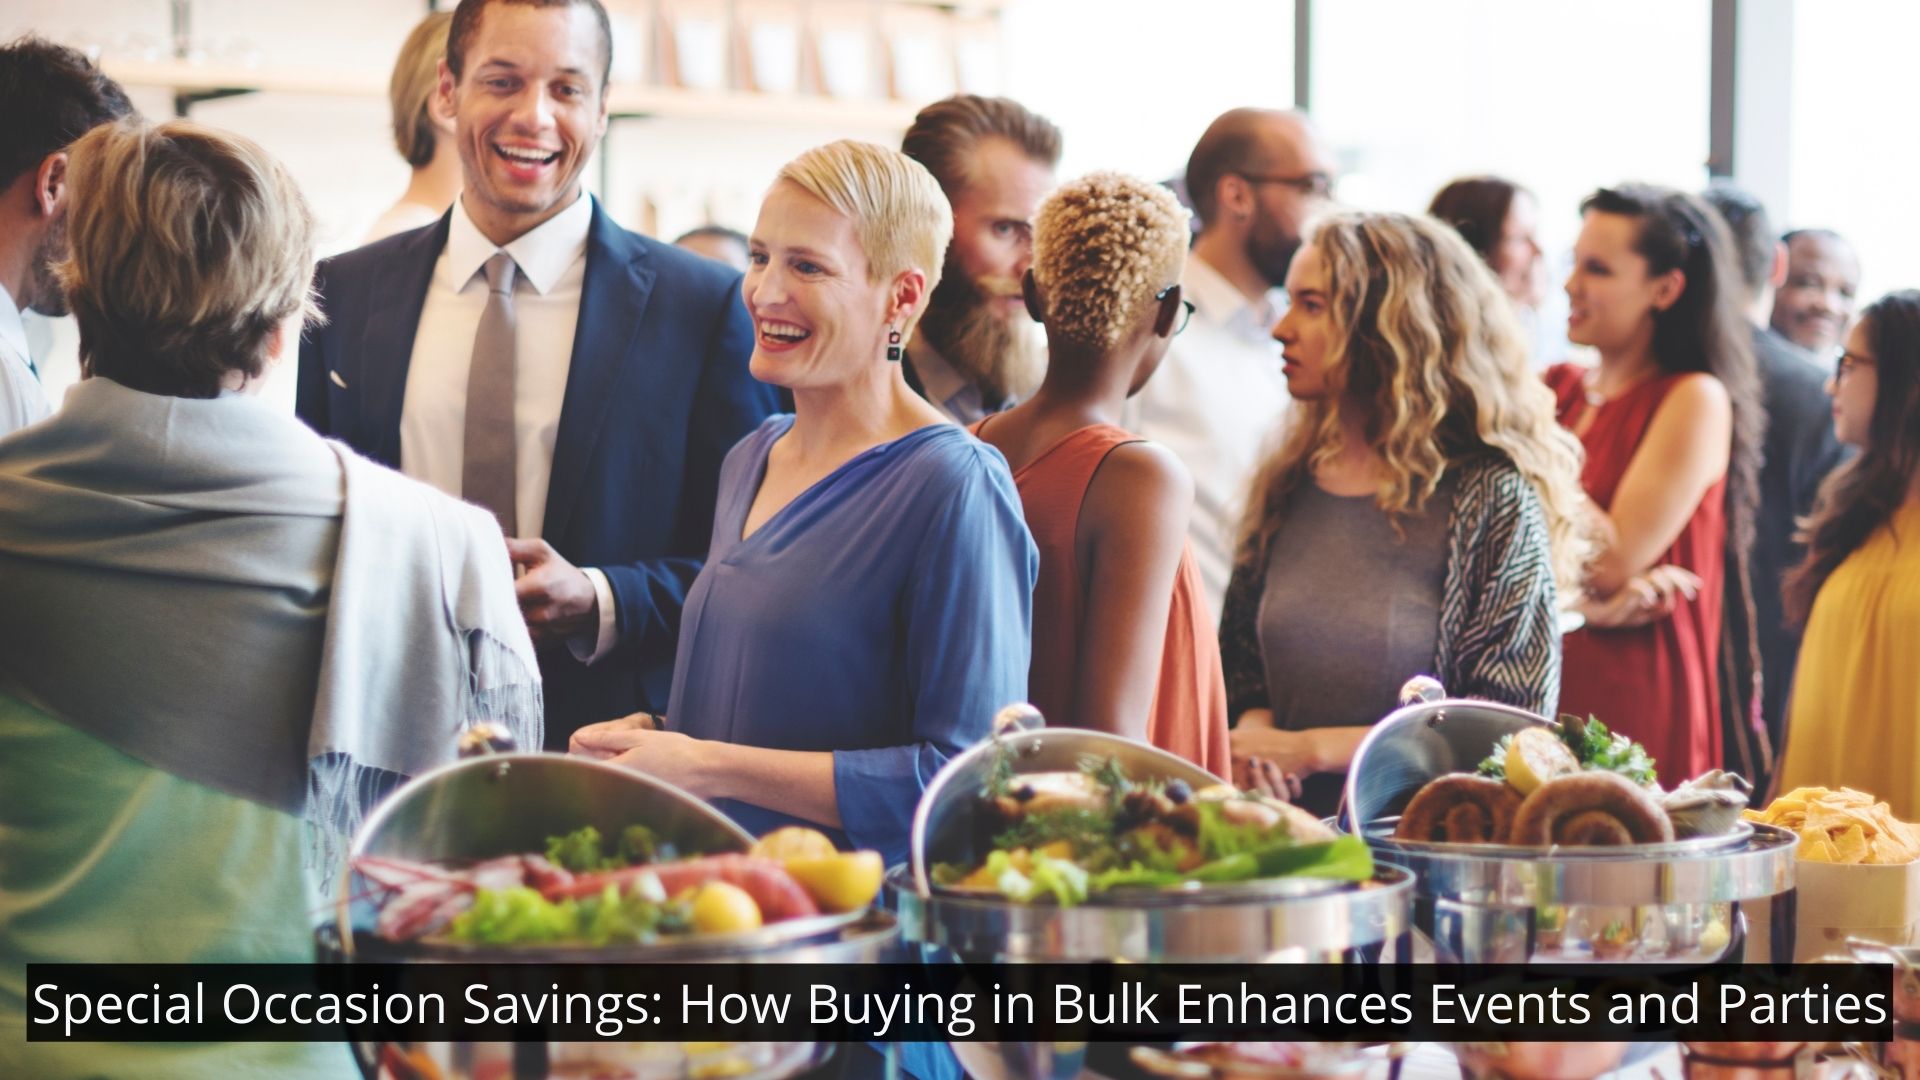 How Buying in Bulk Enhances Events and Parties